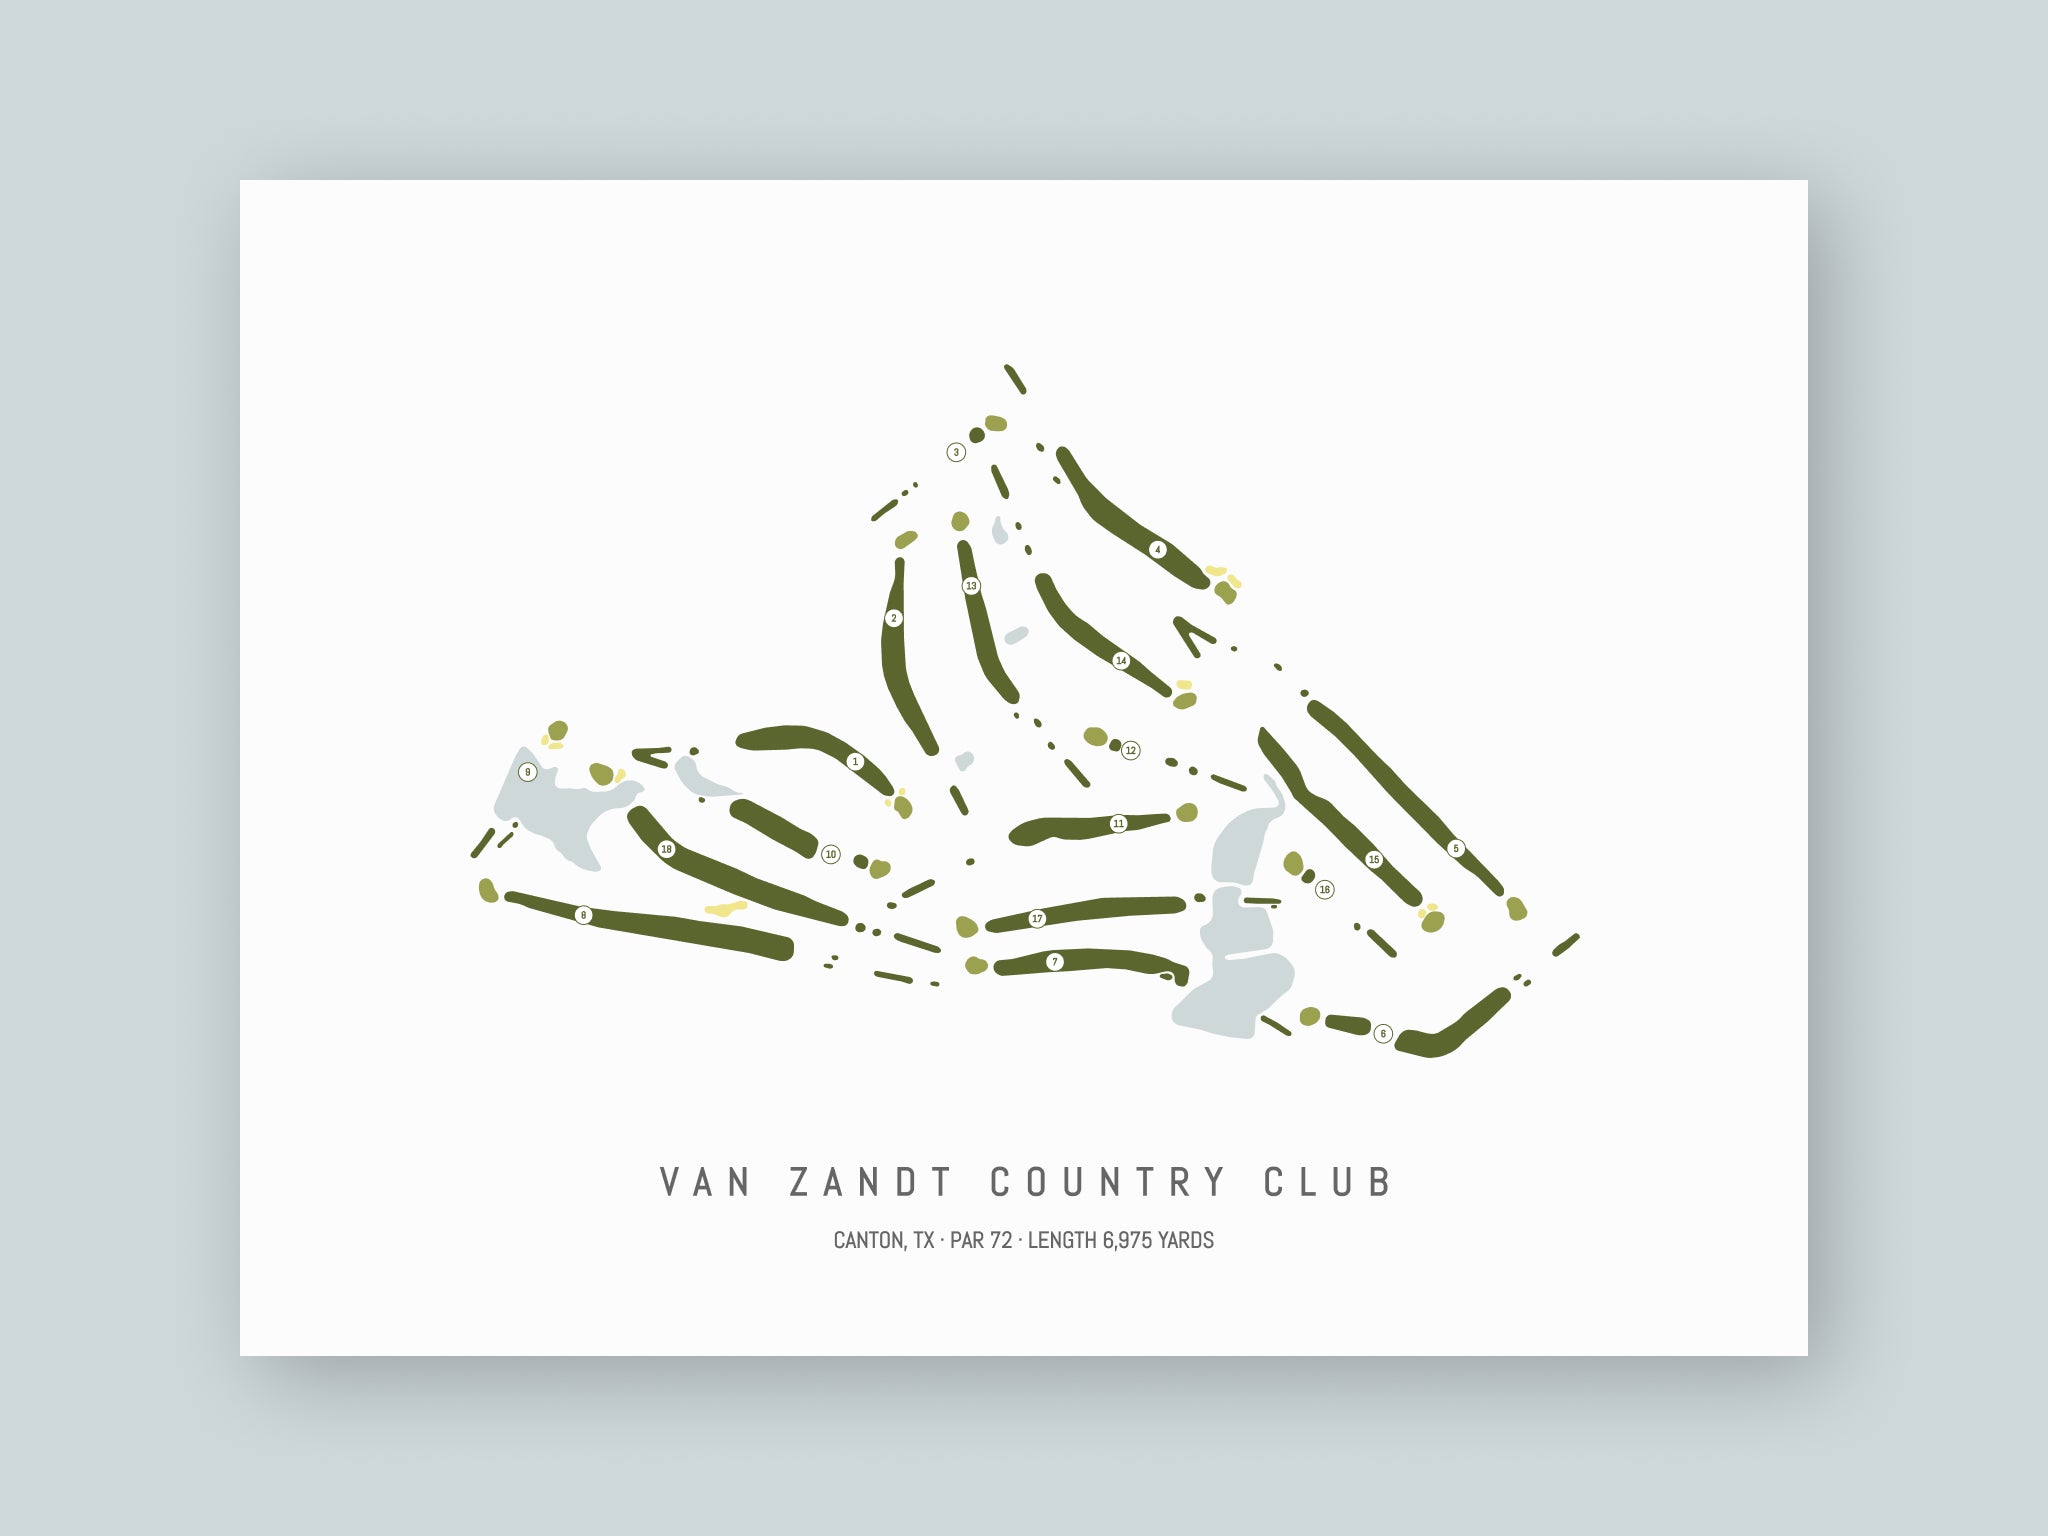 Van-Zandt-Country-Club-TX--Unframed-24x18-With-Hole-Numbers